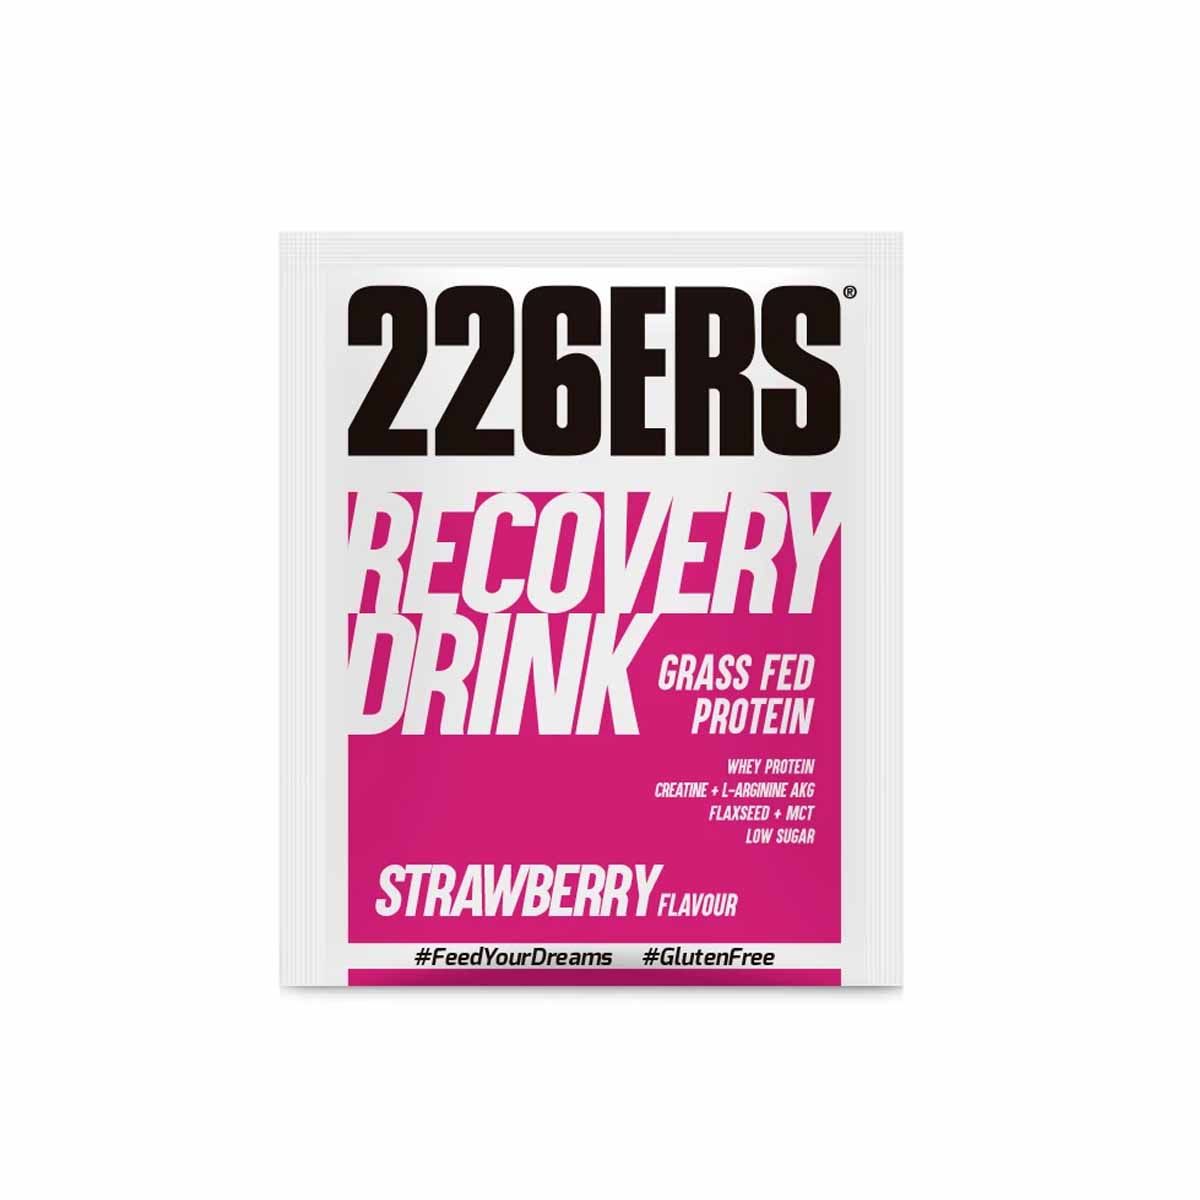 Recuperation drink 226ers - Strawberry